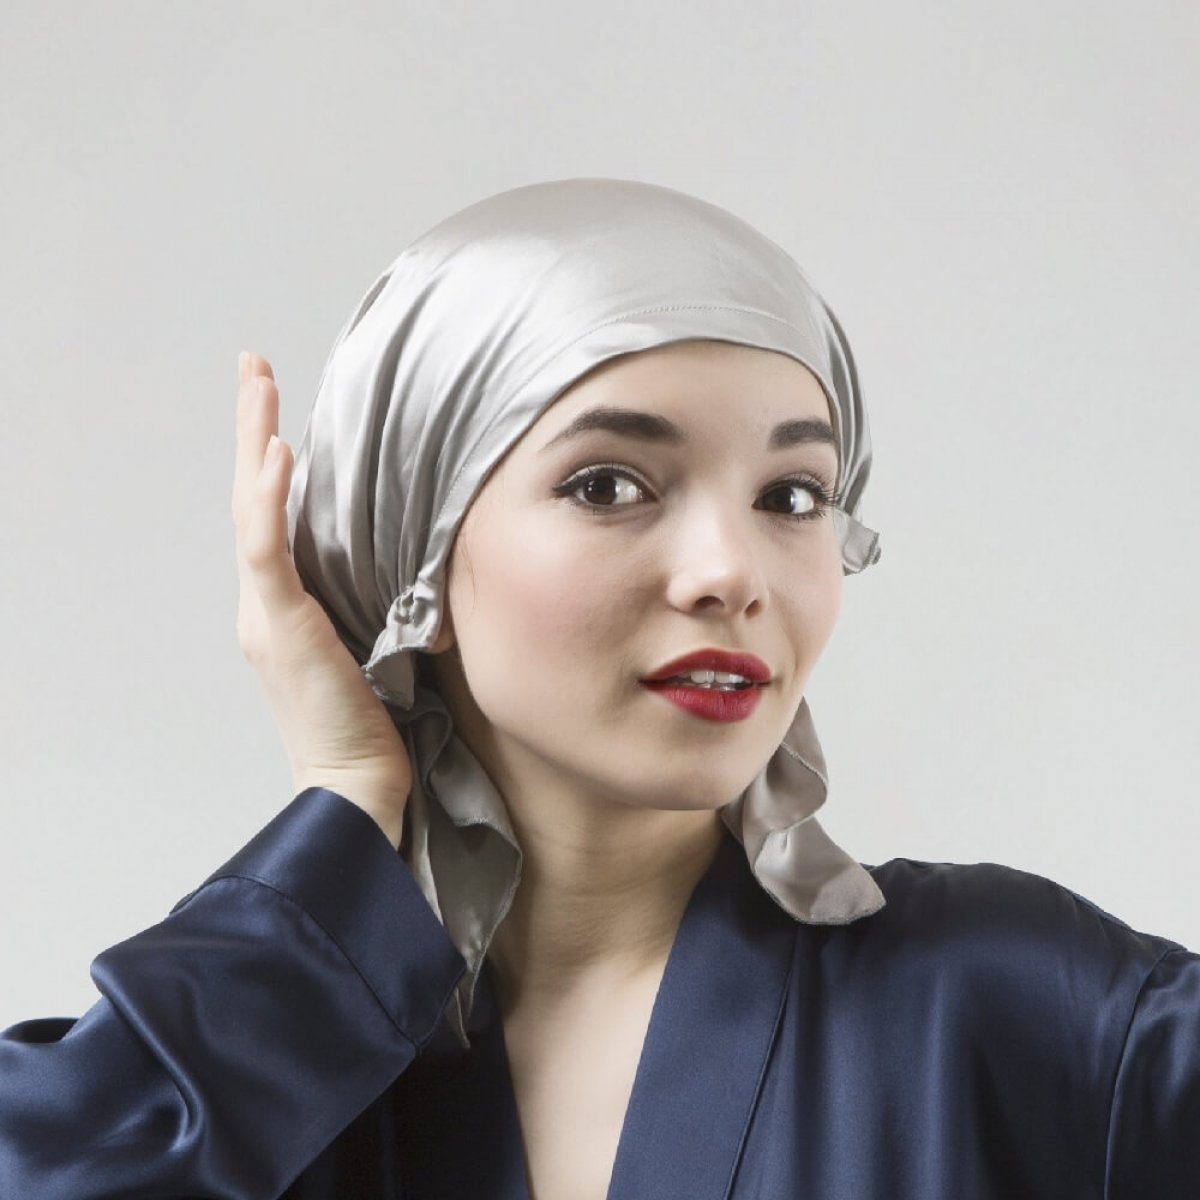 7 Benefits of Silk Sleep Bonnets for Curls - Curly Life - Aus